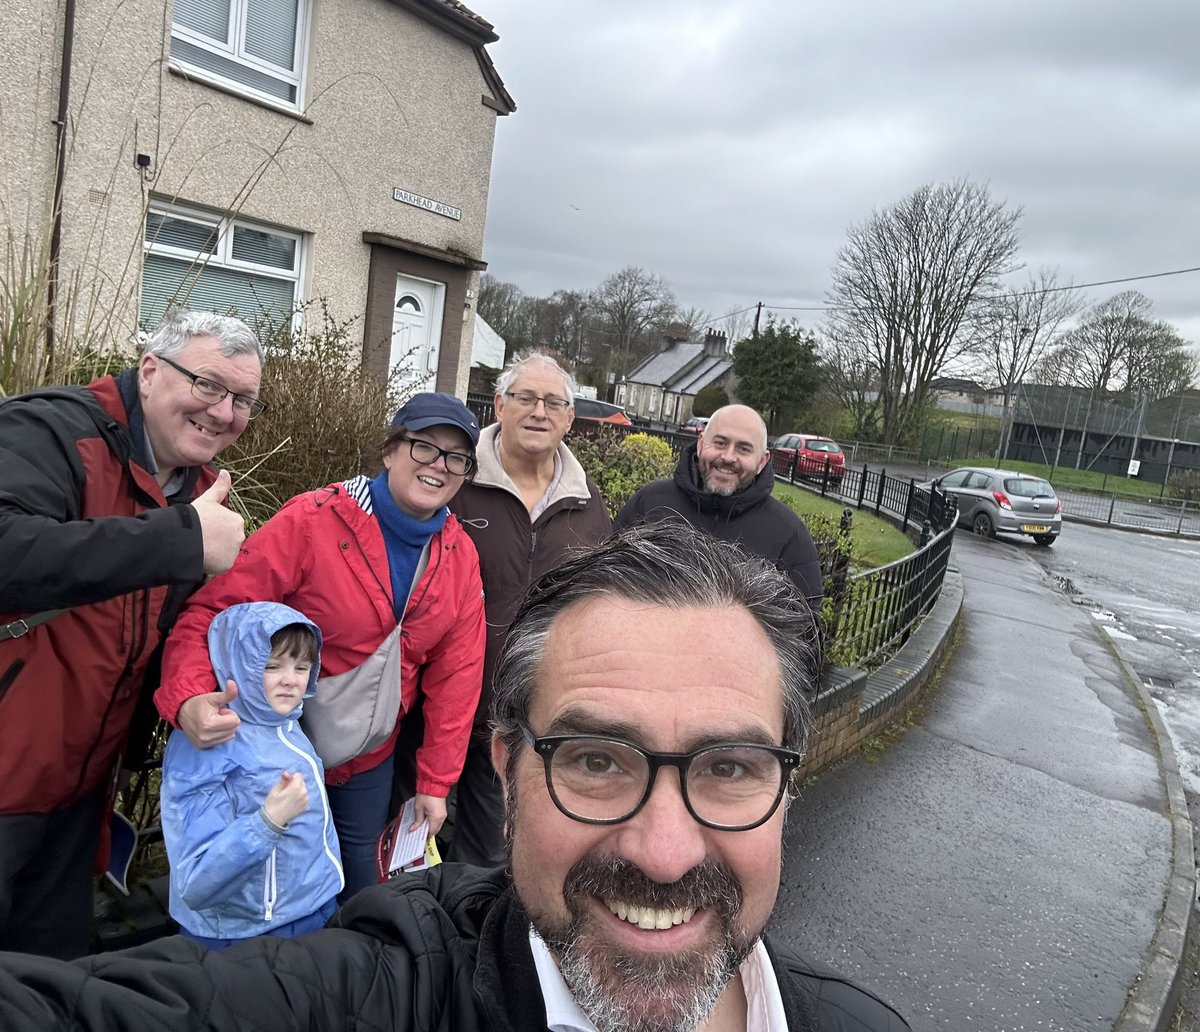 Out in Kilwinning tonight with @NAyrshireLab Cllrs @jcullinane86, @DonaldReid3 &our #CentralAyrshire volunteers. Talking to @ScottishLabour voters and people fed up with the SNP and the Tories and switching to Labour. #GENow #VoteScotLab24